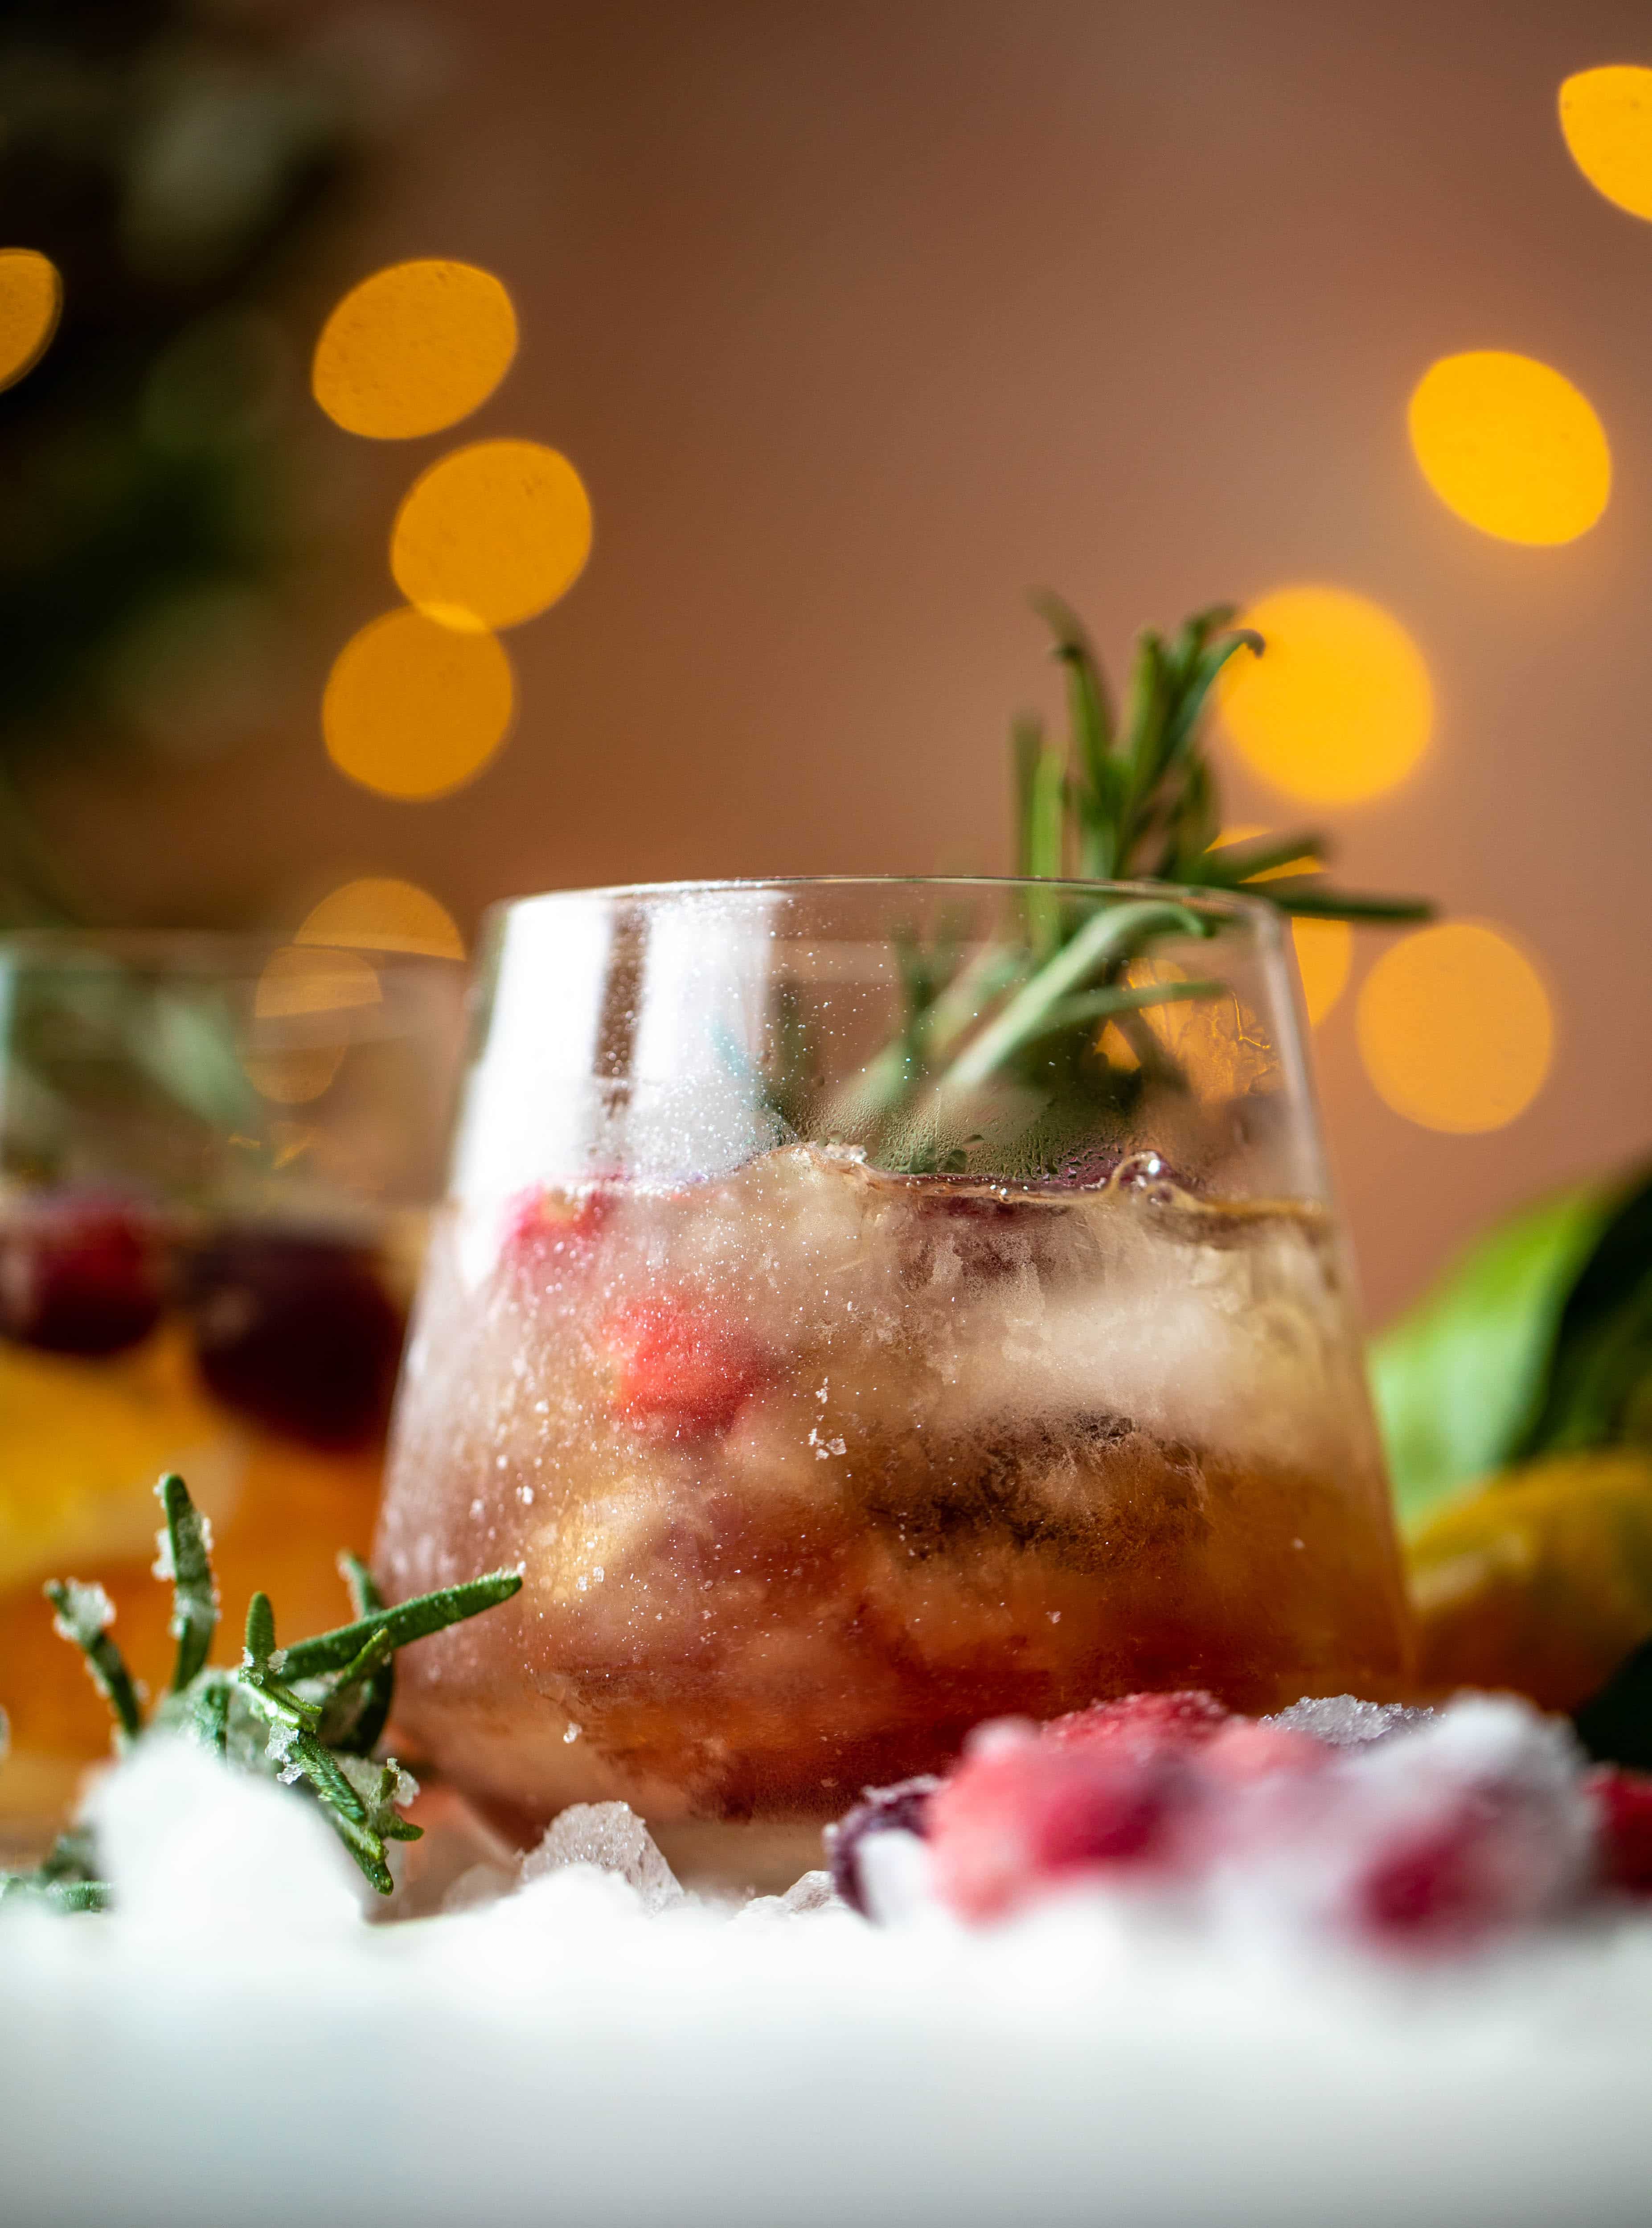 The mistletoe manhattan is a fun holiday spin on the classic manhattan cocktail! Sugared cranberries and rosemary make this super festive.